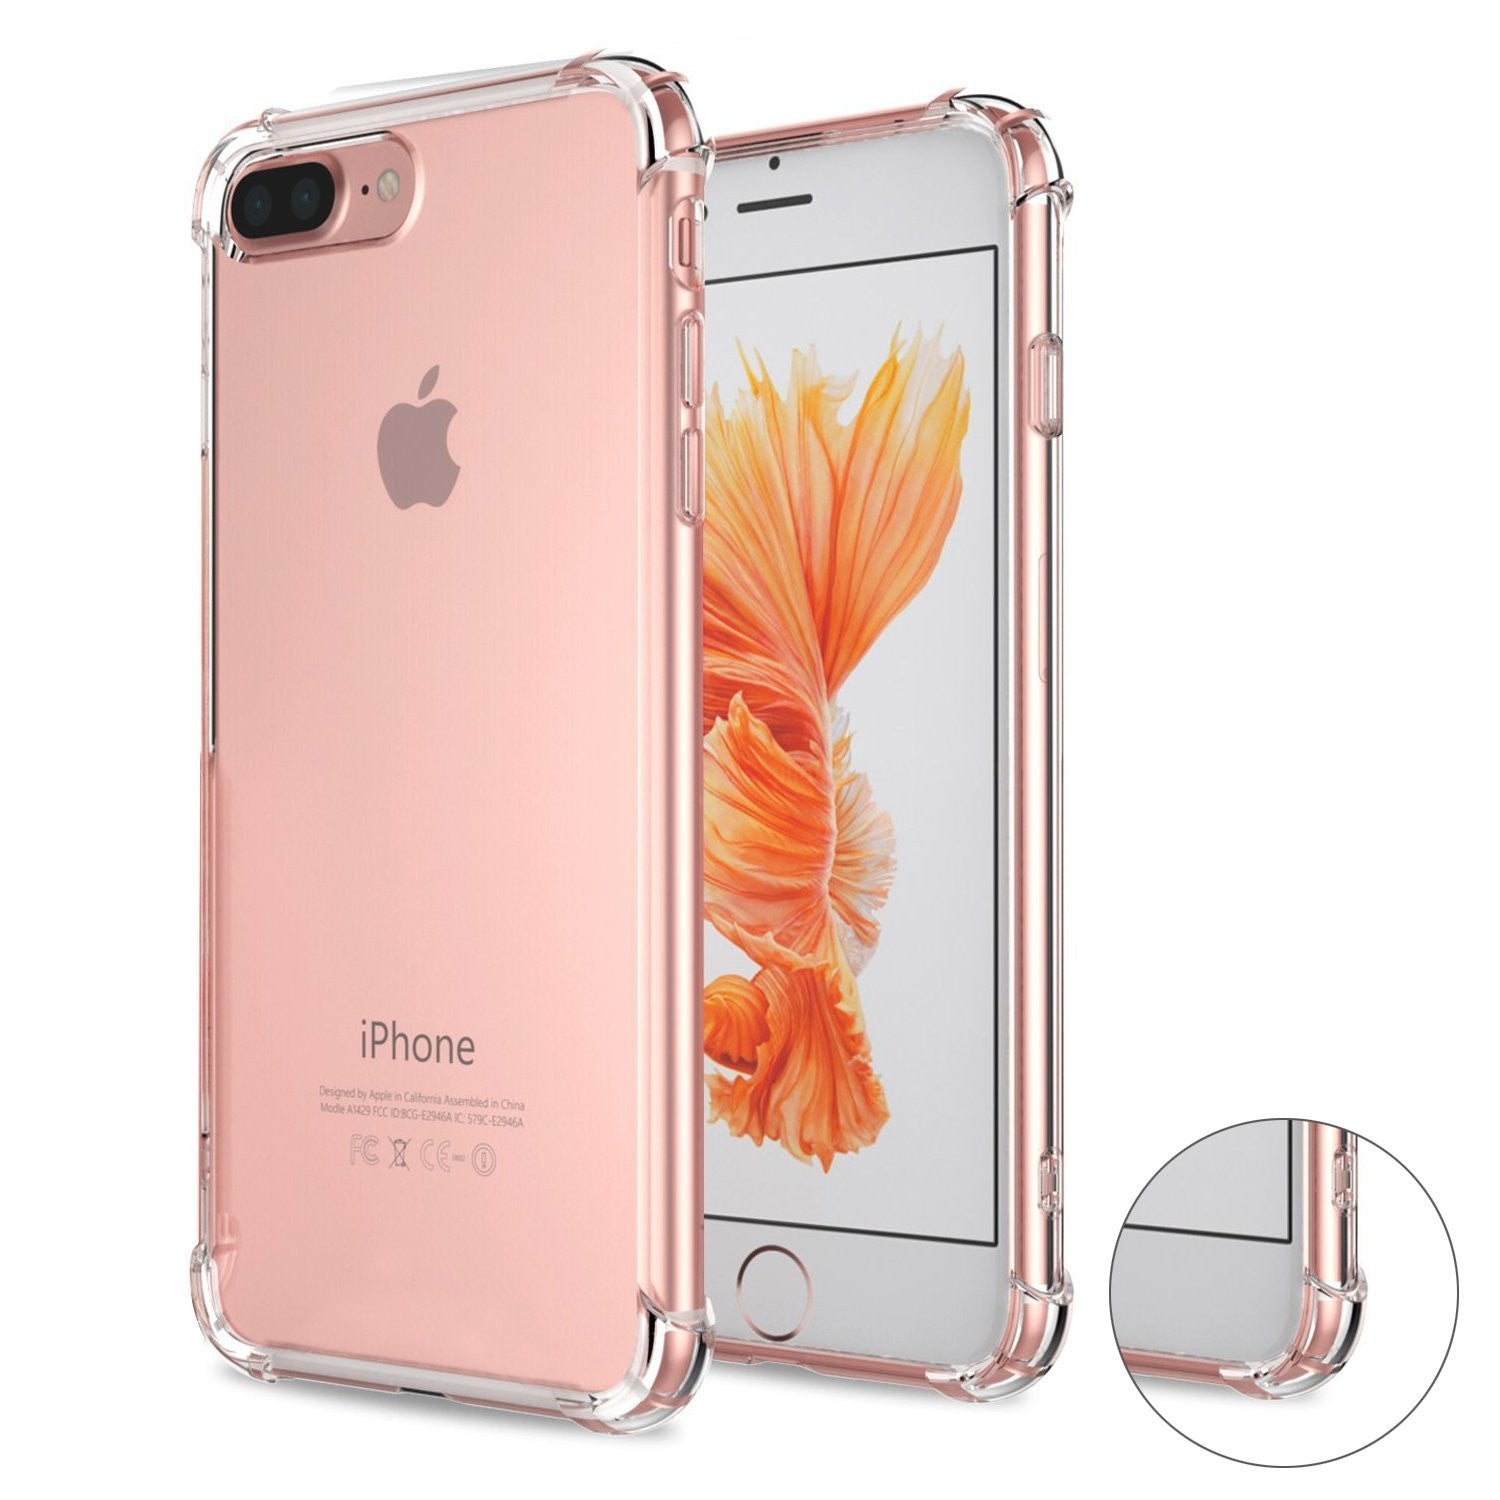 Crystal Clear Case for iPhone 7 Plus